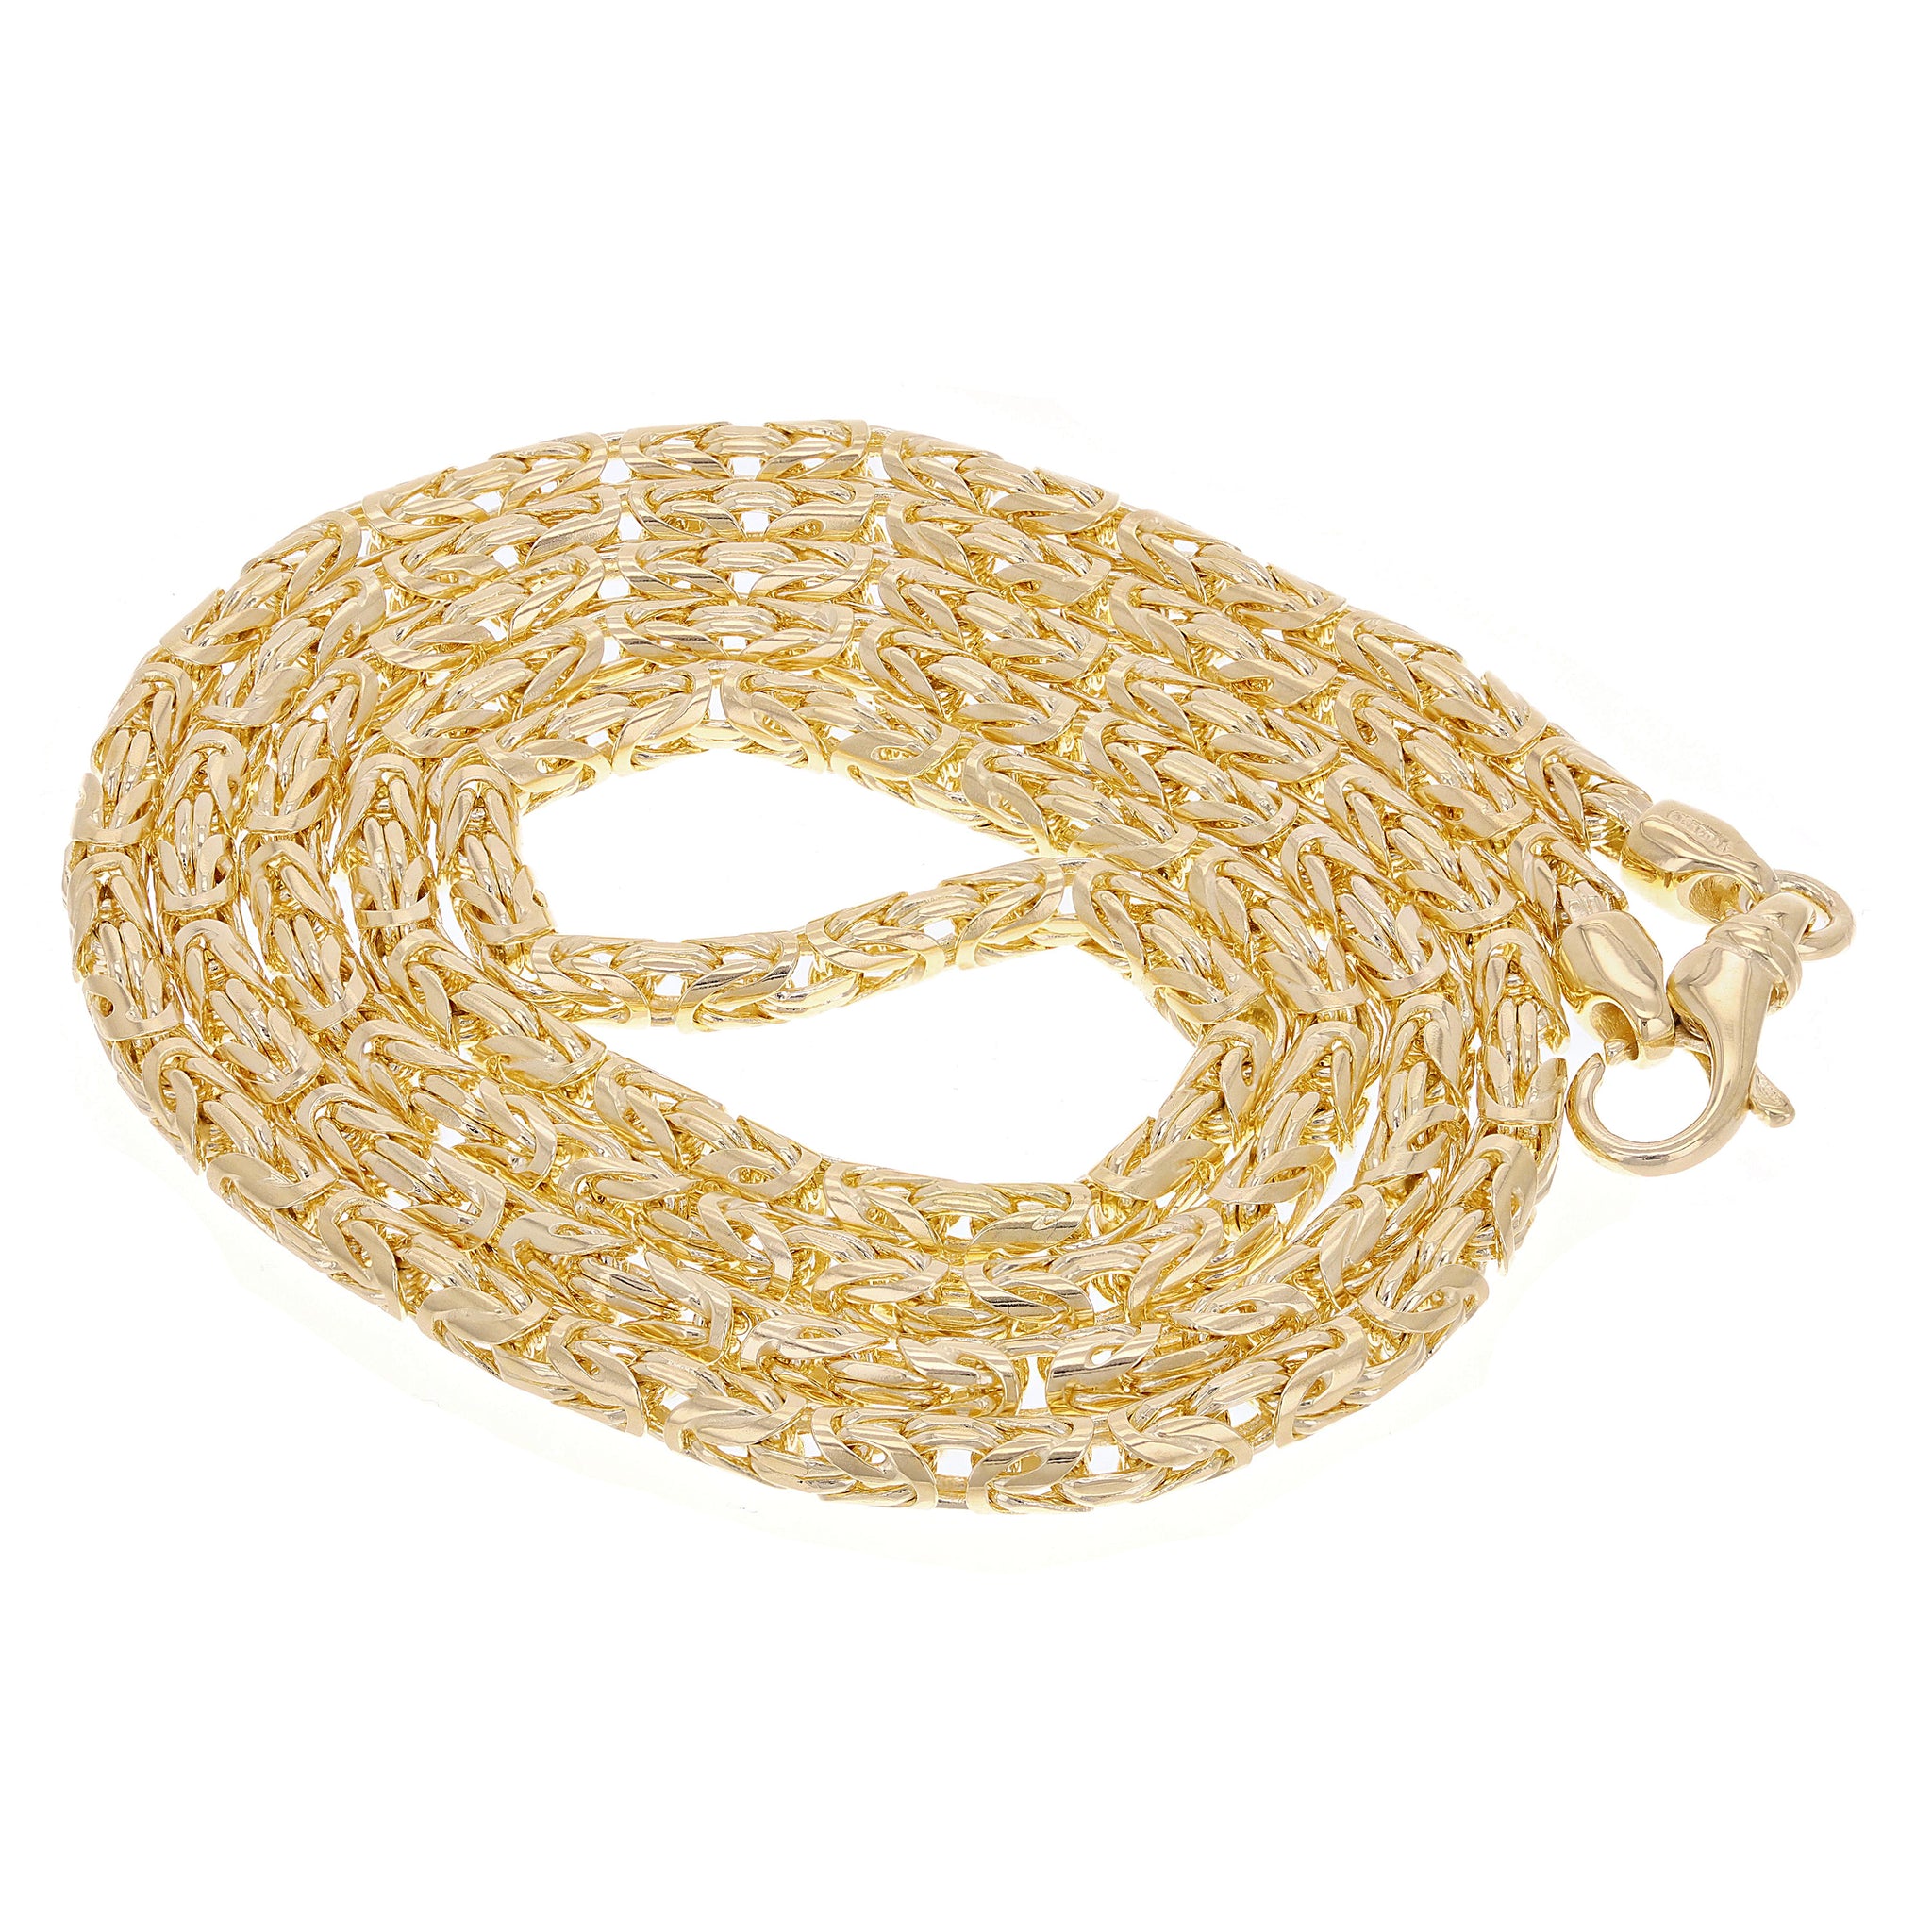 Gold Stainless Steel Byzantine Chain Necklace Chn8501 | Wholesale Jewelry  Website